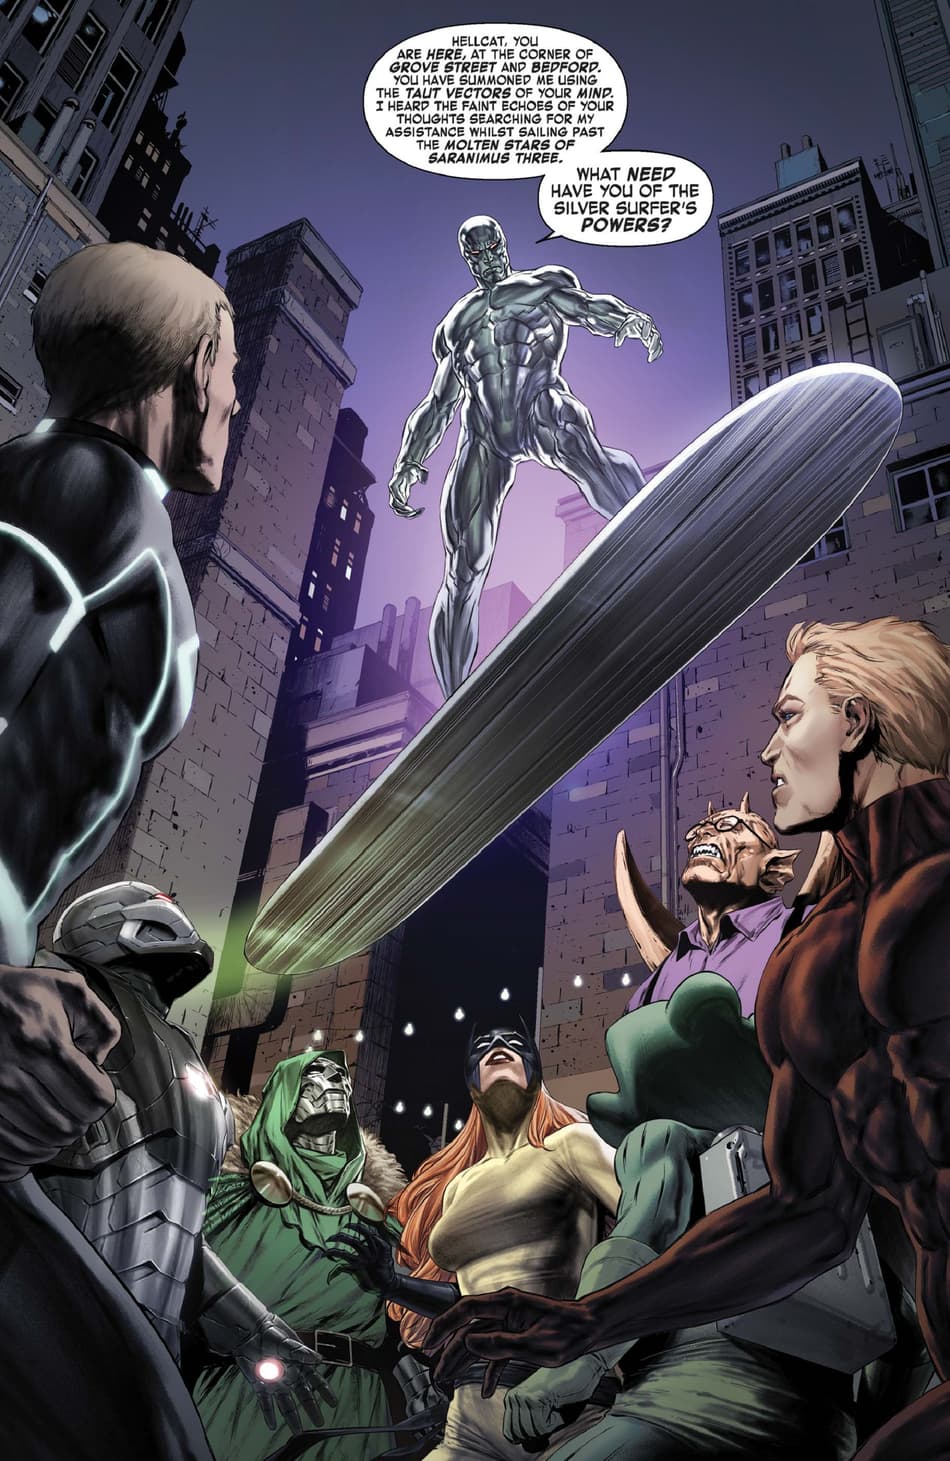 Silver Surfer makes an appearance in IRON MAN (2020) #17.